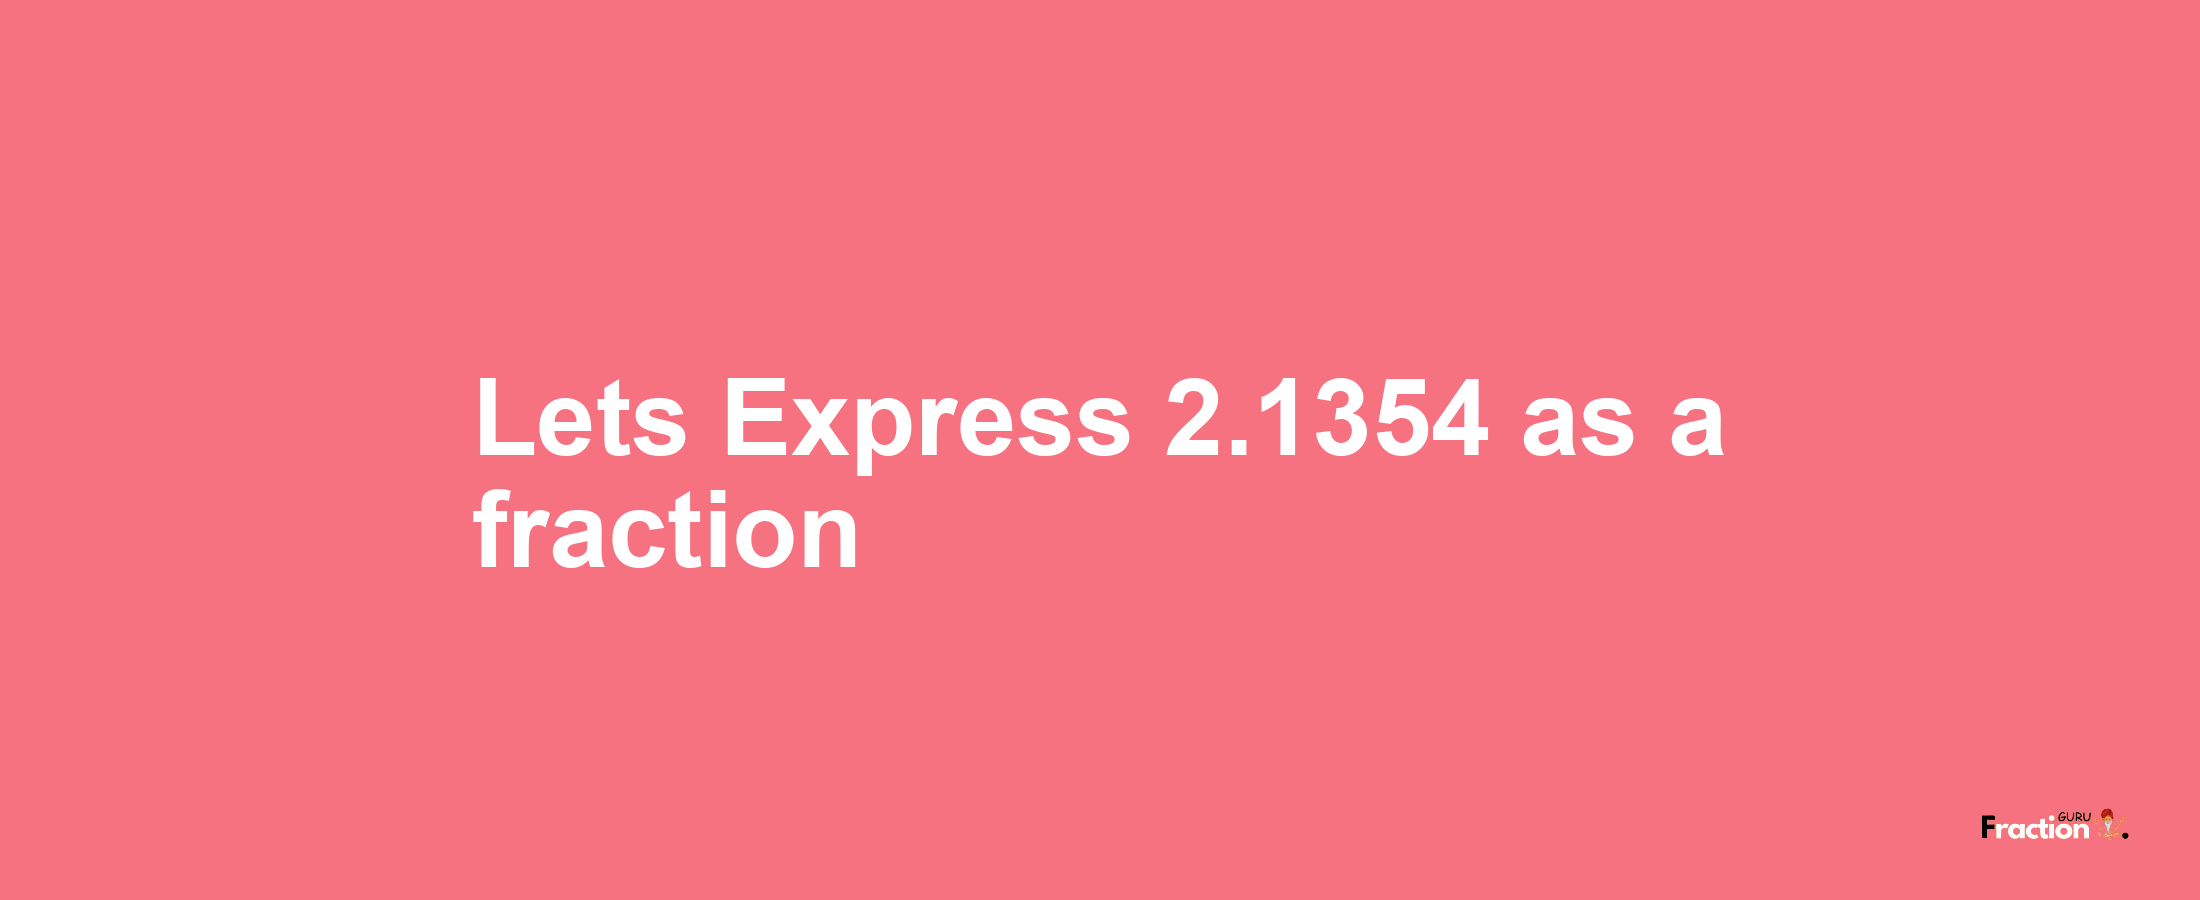 Lets Express 2.1354 as afraction